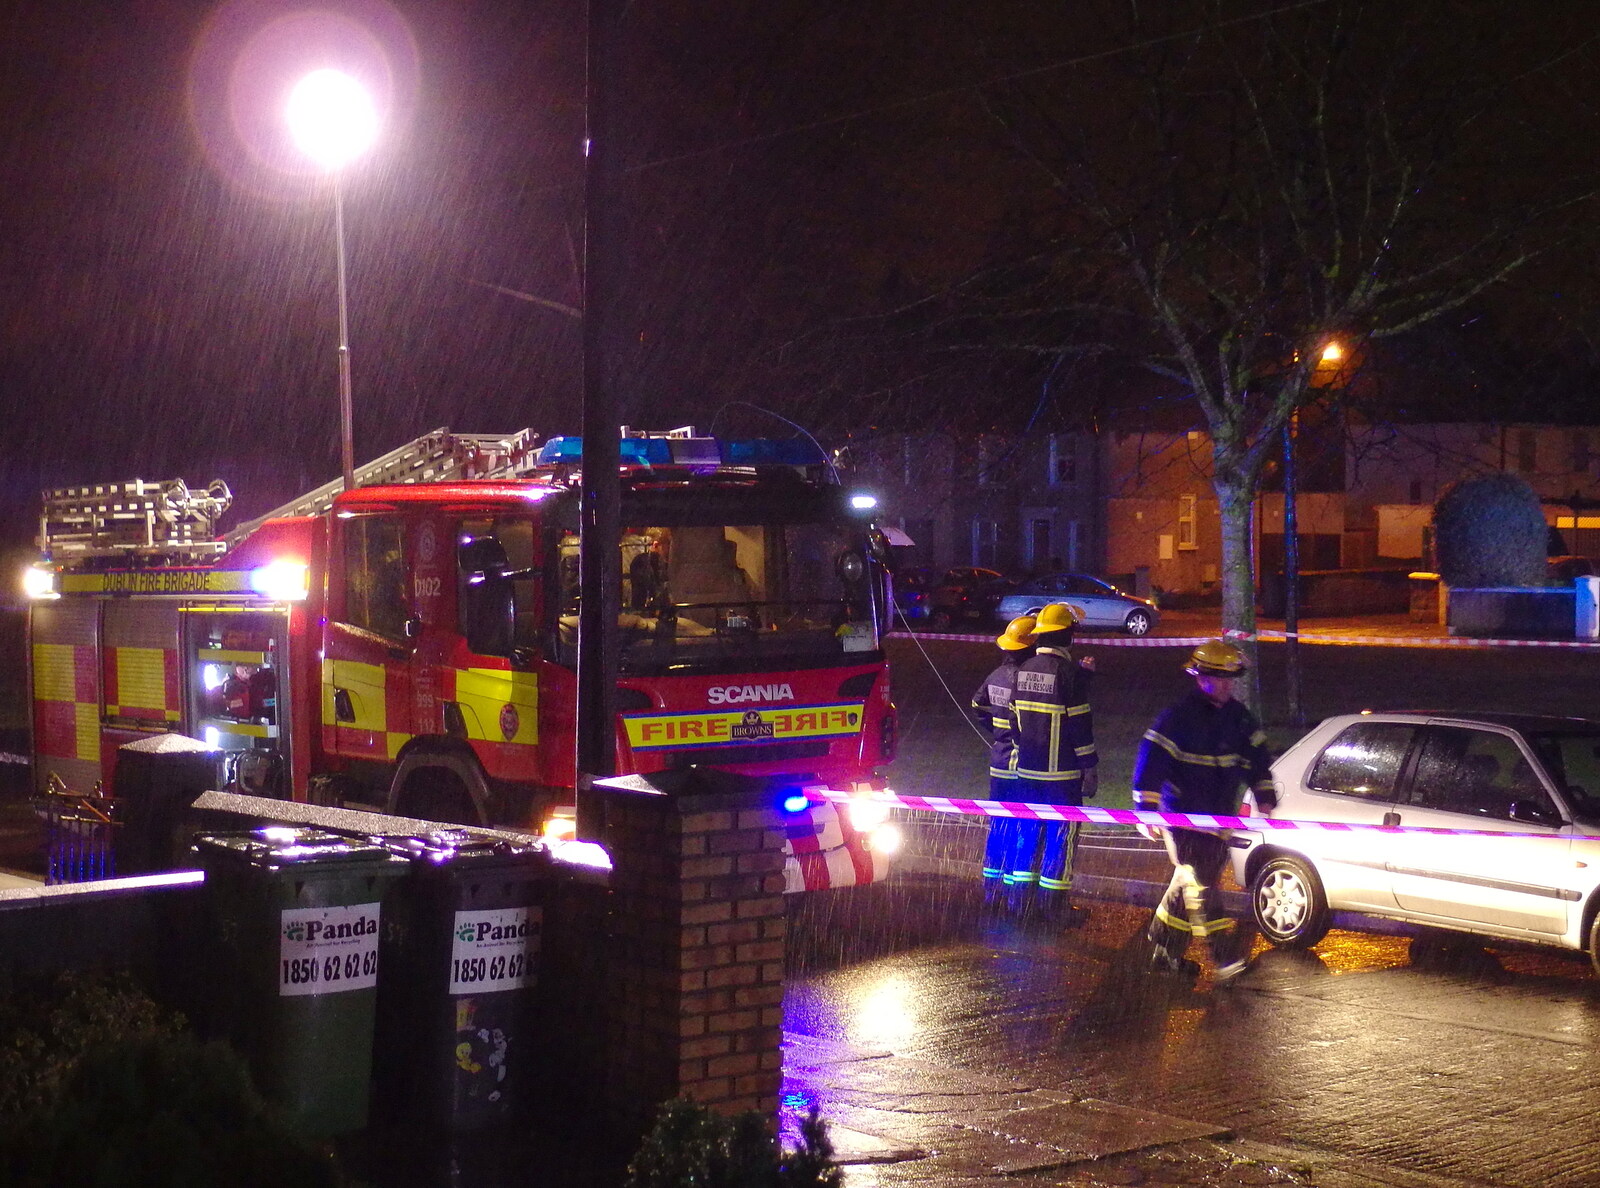 One of several fire engines on the scene from Dun Laoghaire and an Electrical Disaster, Monkstown, County Dublin, Ireland - 4th January 2014